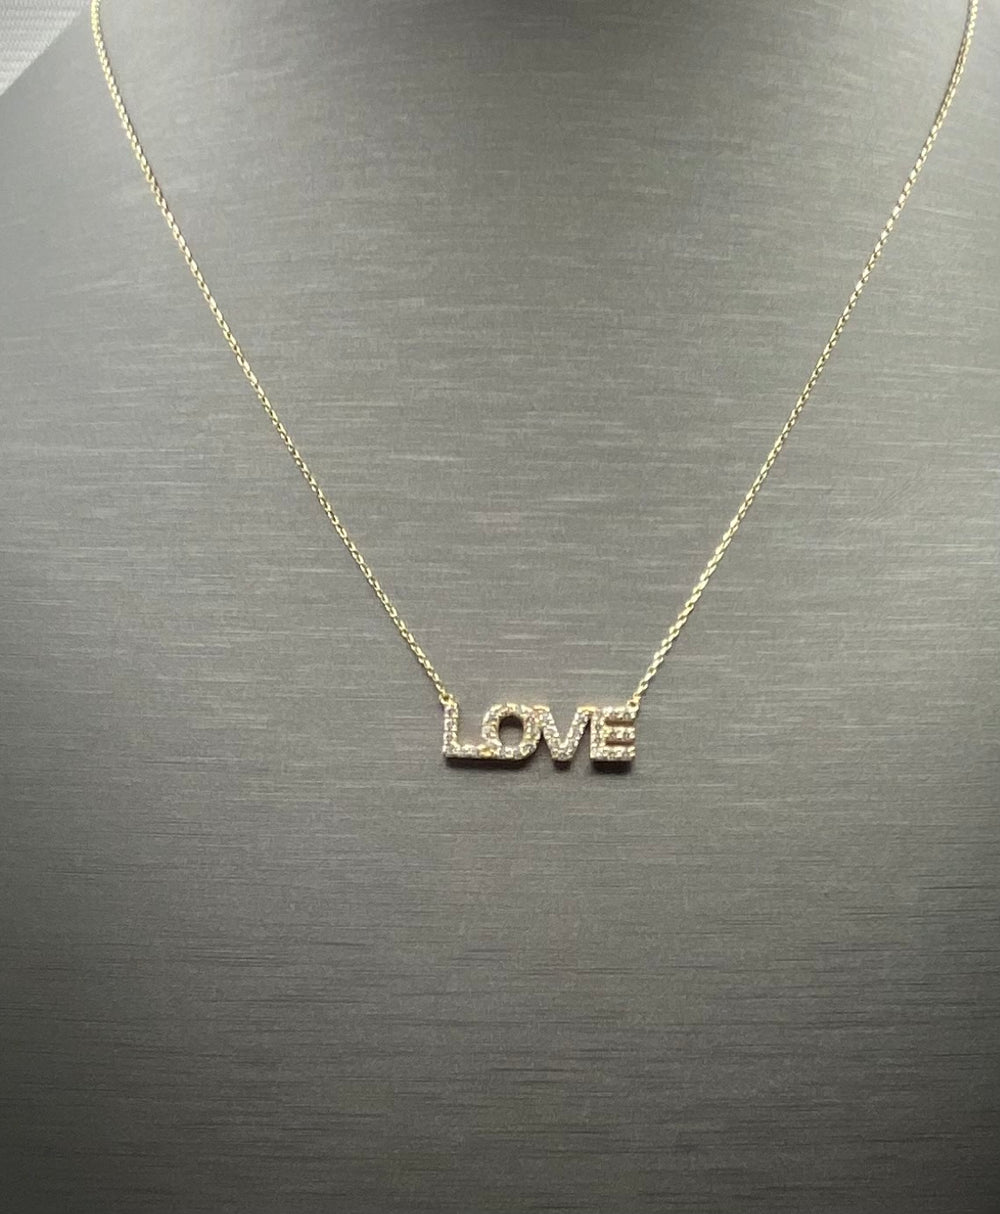 Real 10KT Gold Chain & ‘LOVE’ Charm with Cubic Zirconia Stones